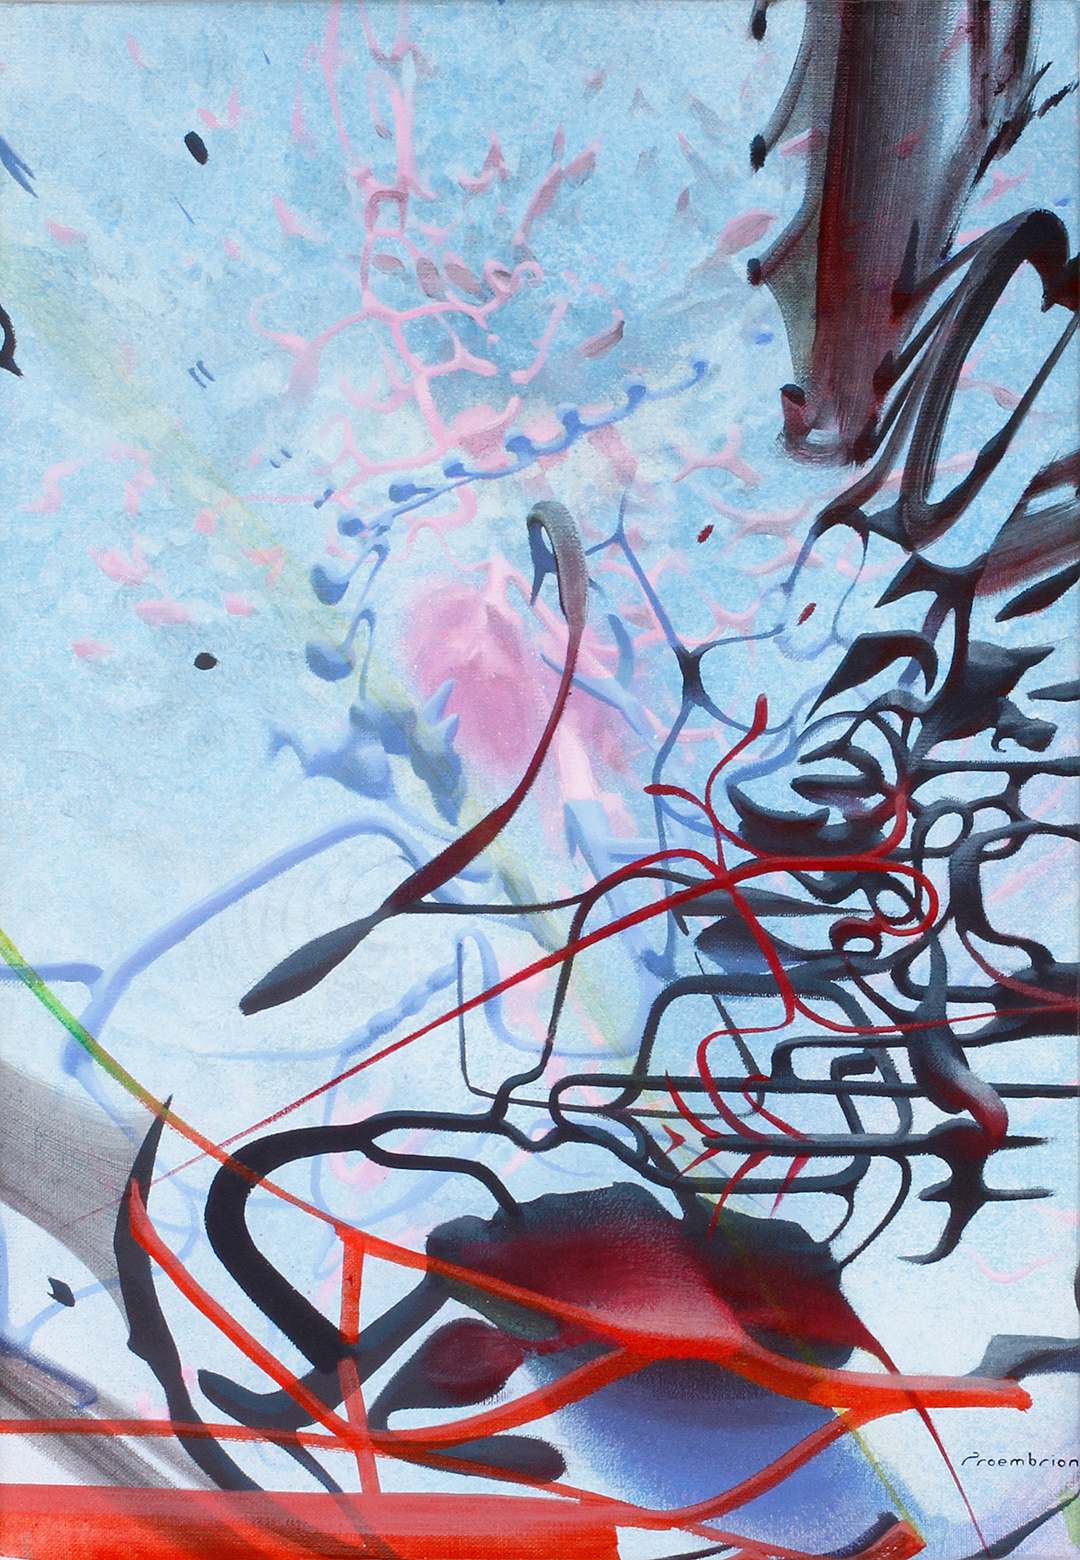 proembrion GRAFFUTURISM surrealabstraction RGB acrylic on canvas